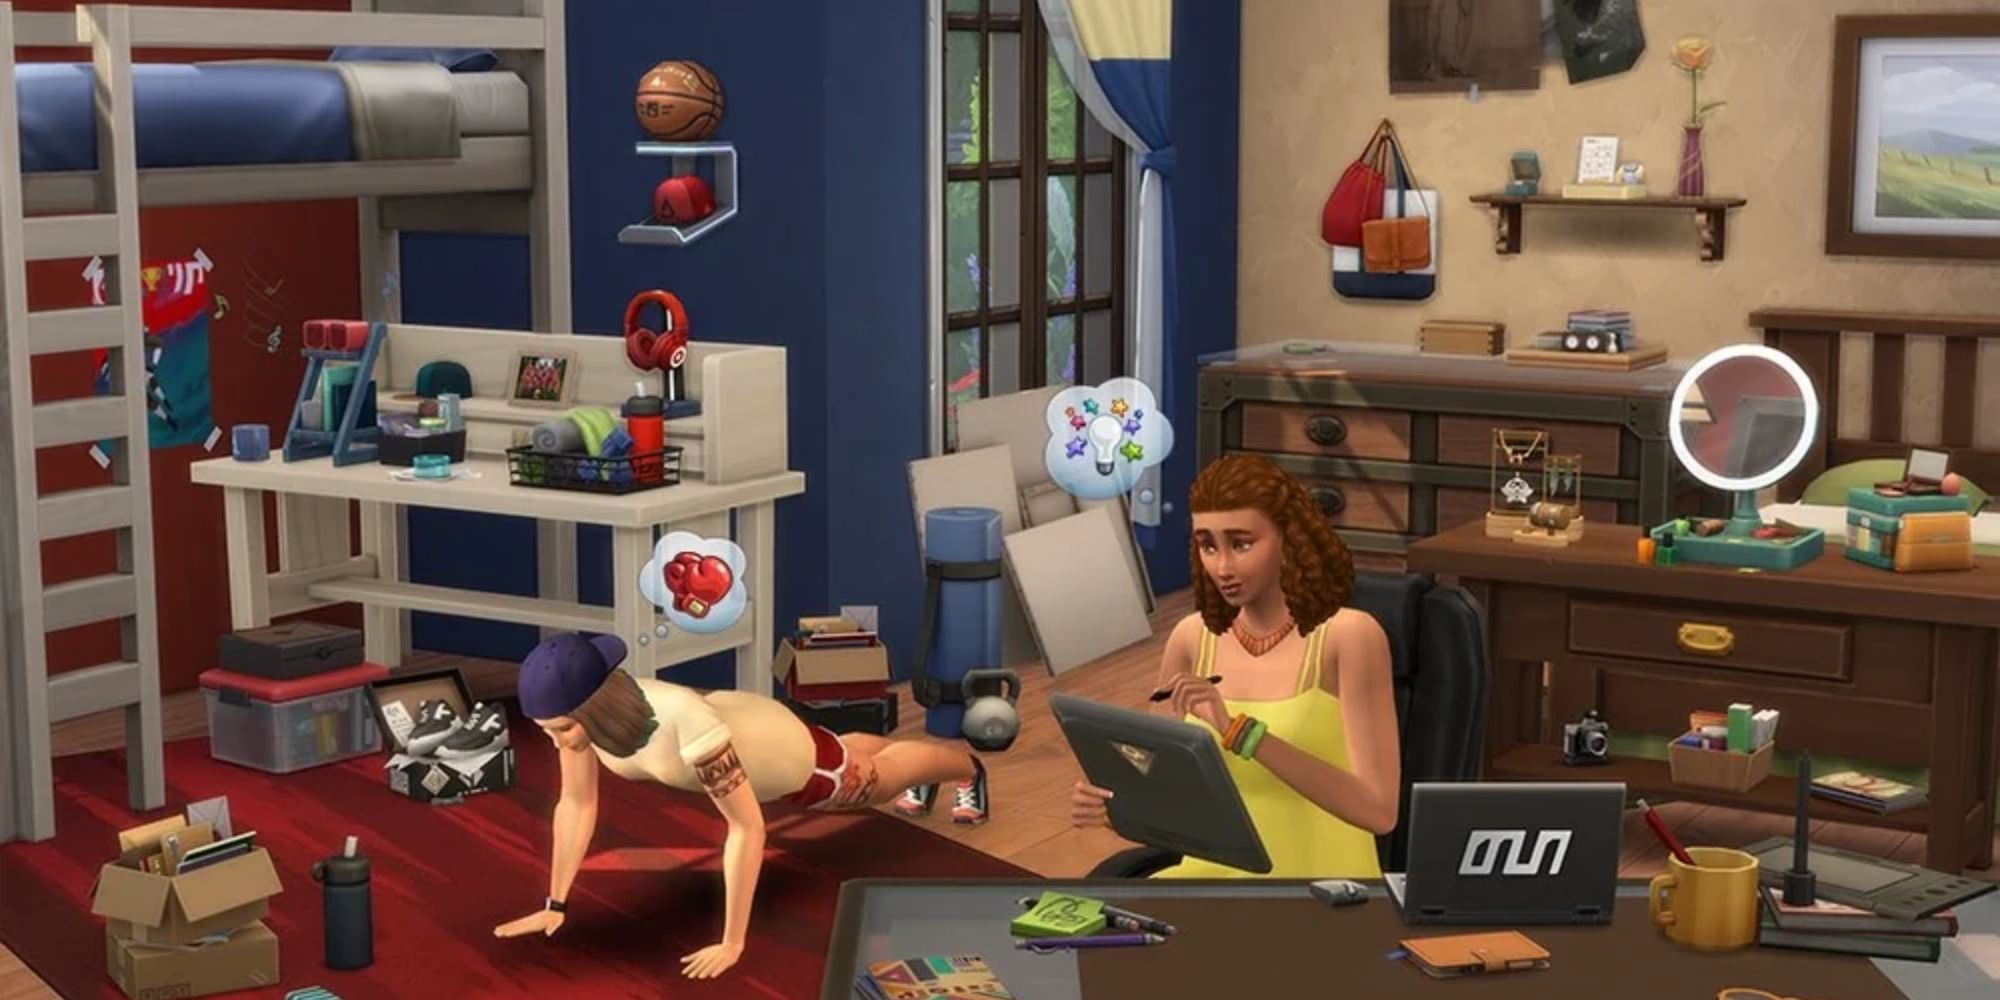 The Sims 4 Everyday Clutter Kit: Two people in a messy room, with a laptop, coffee cups, headphones and general clutter around them